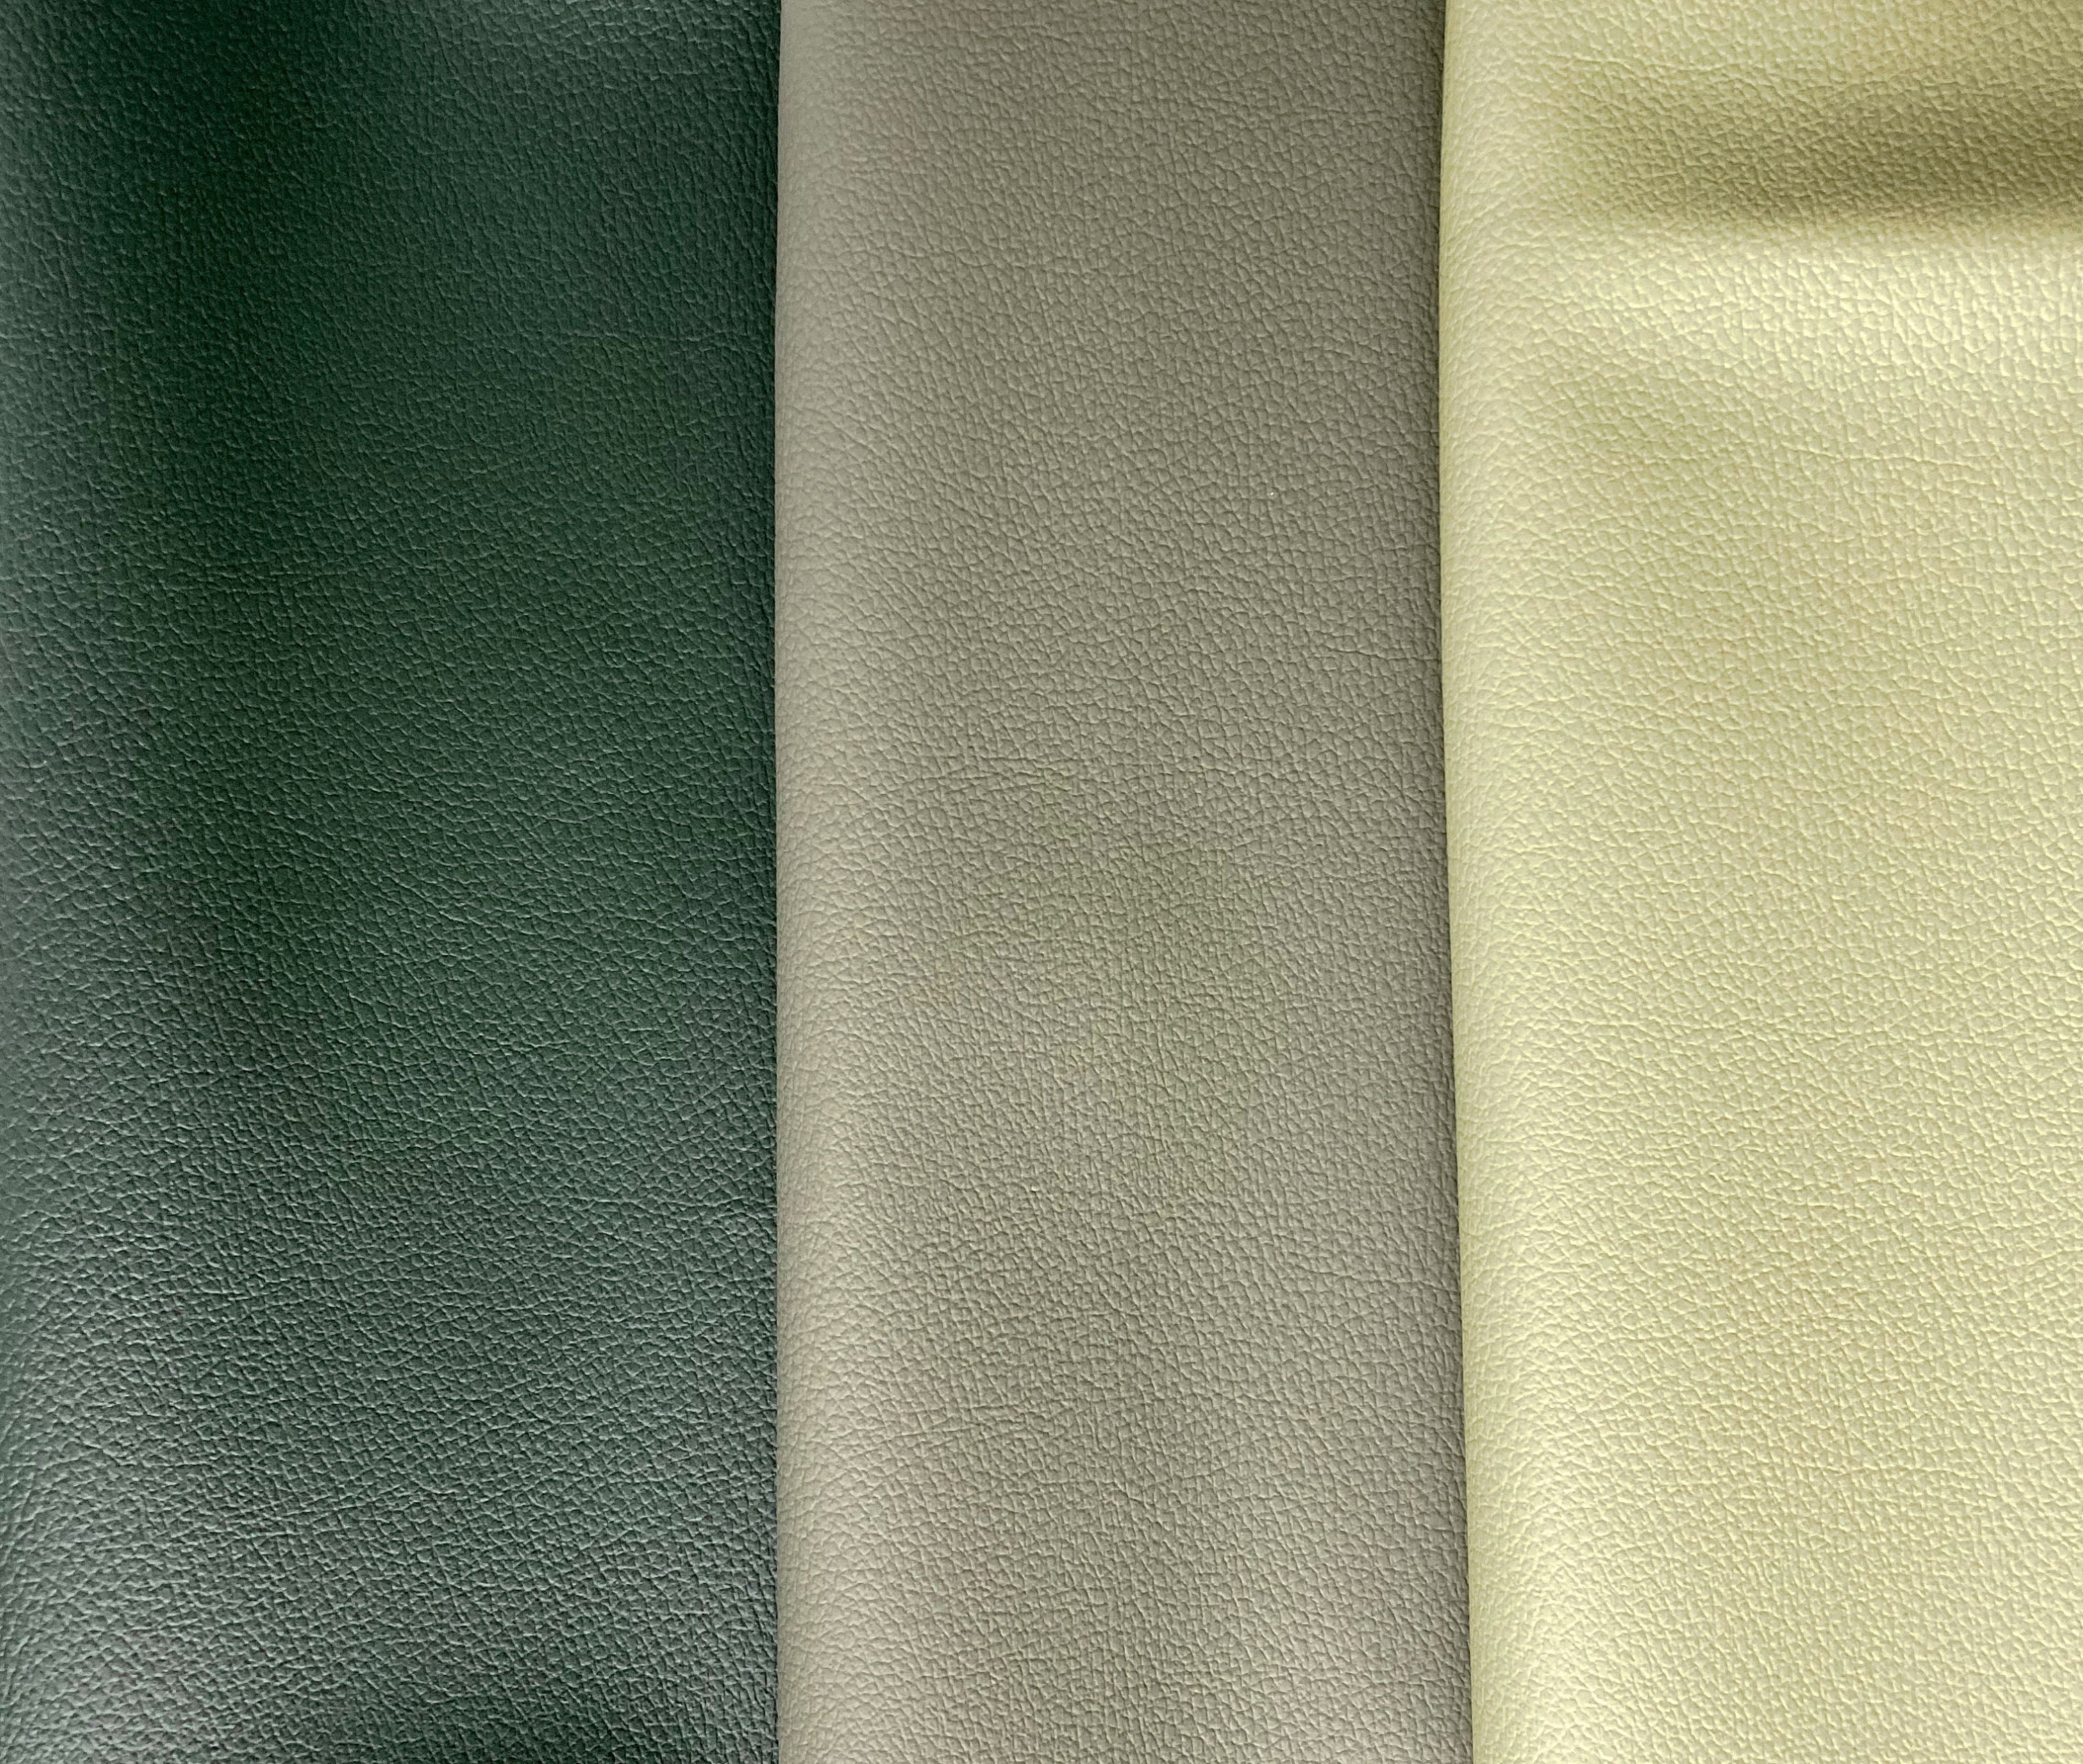 Faux Leather Fabric in Cow Leather Pattern - Dusty Mint Green - Half Yard -  The Heyday Shop